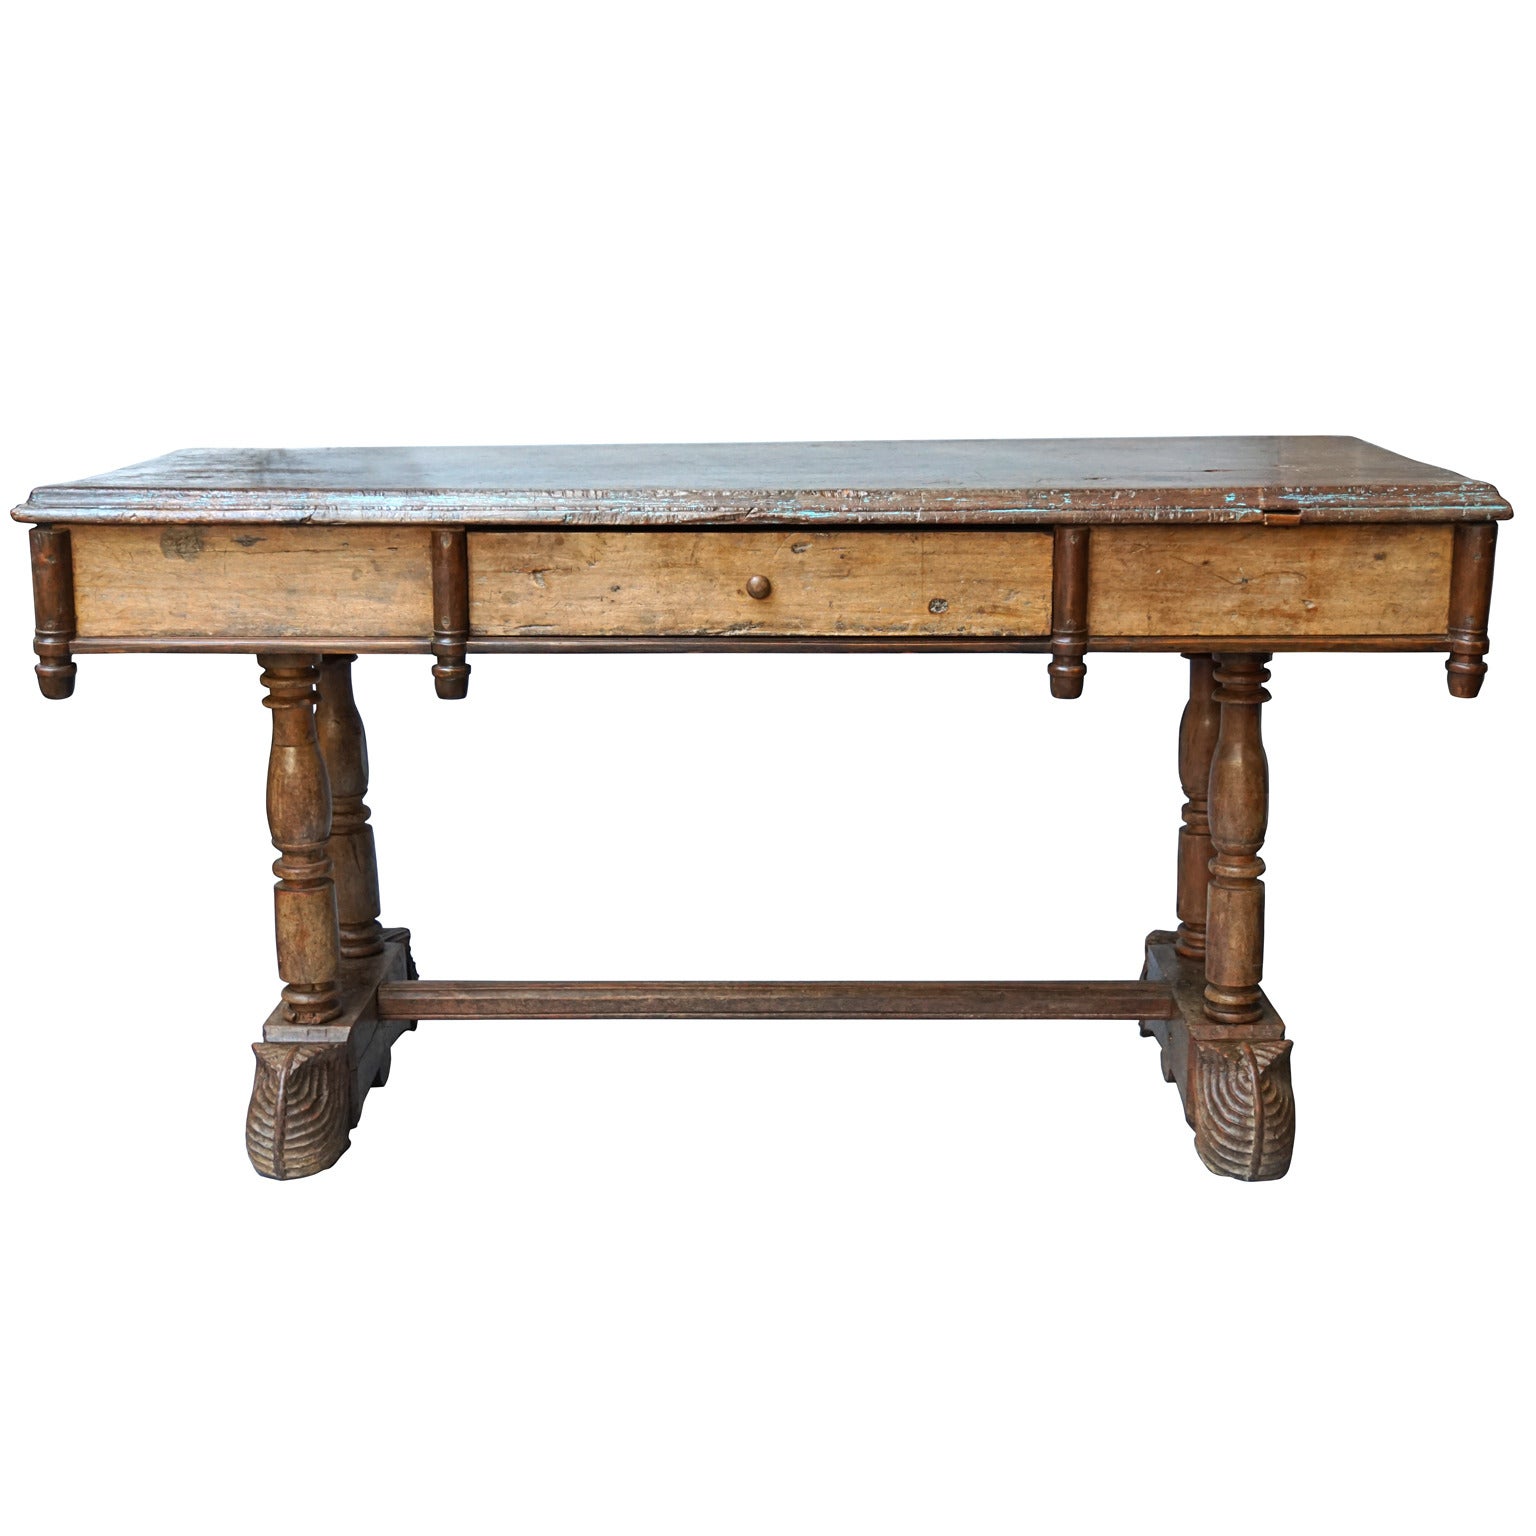 19th Century Fruitwood Side Table with Unusual Carved Feet